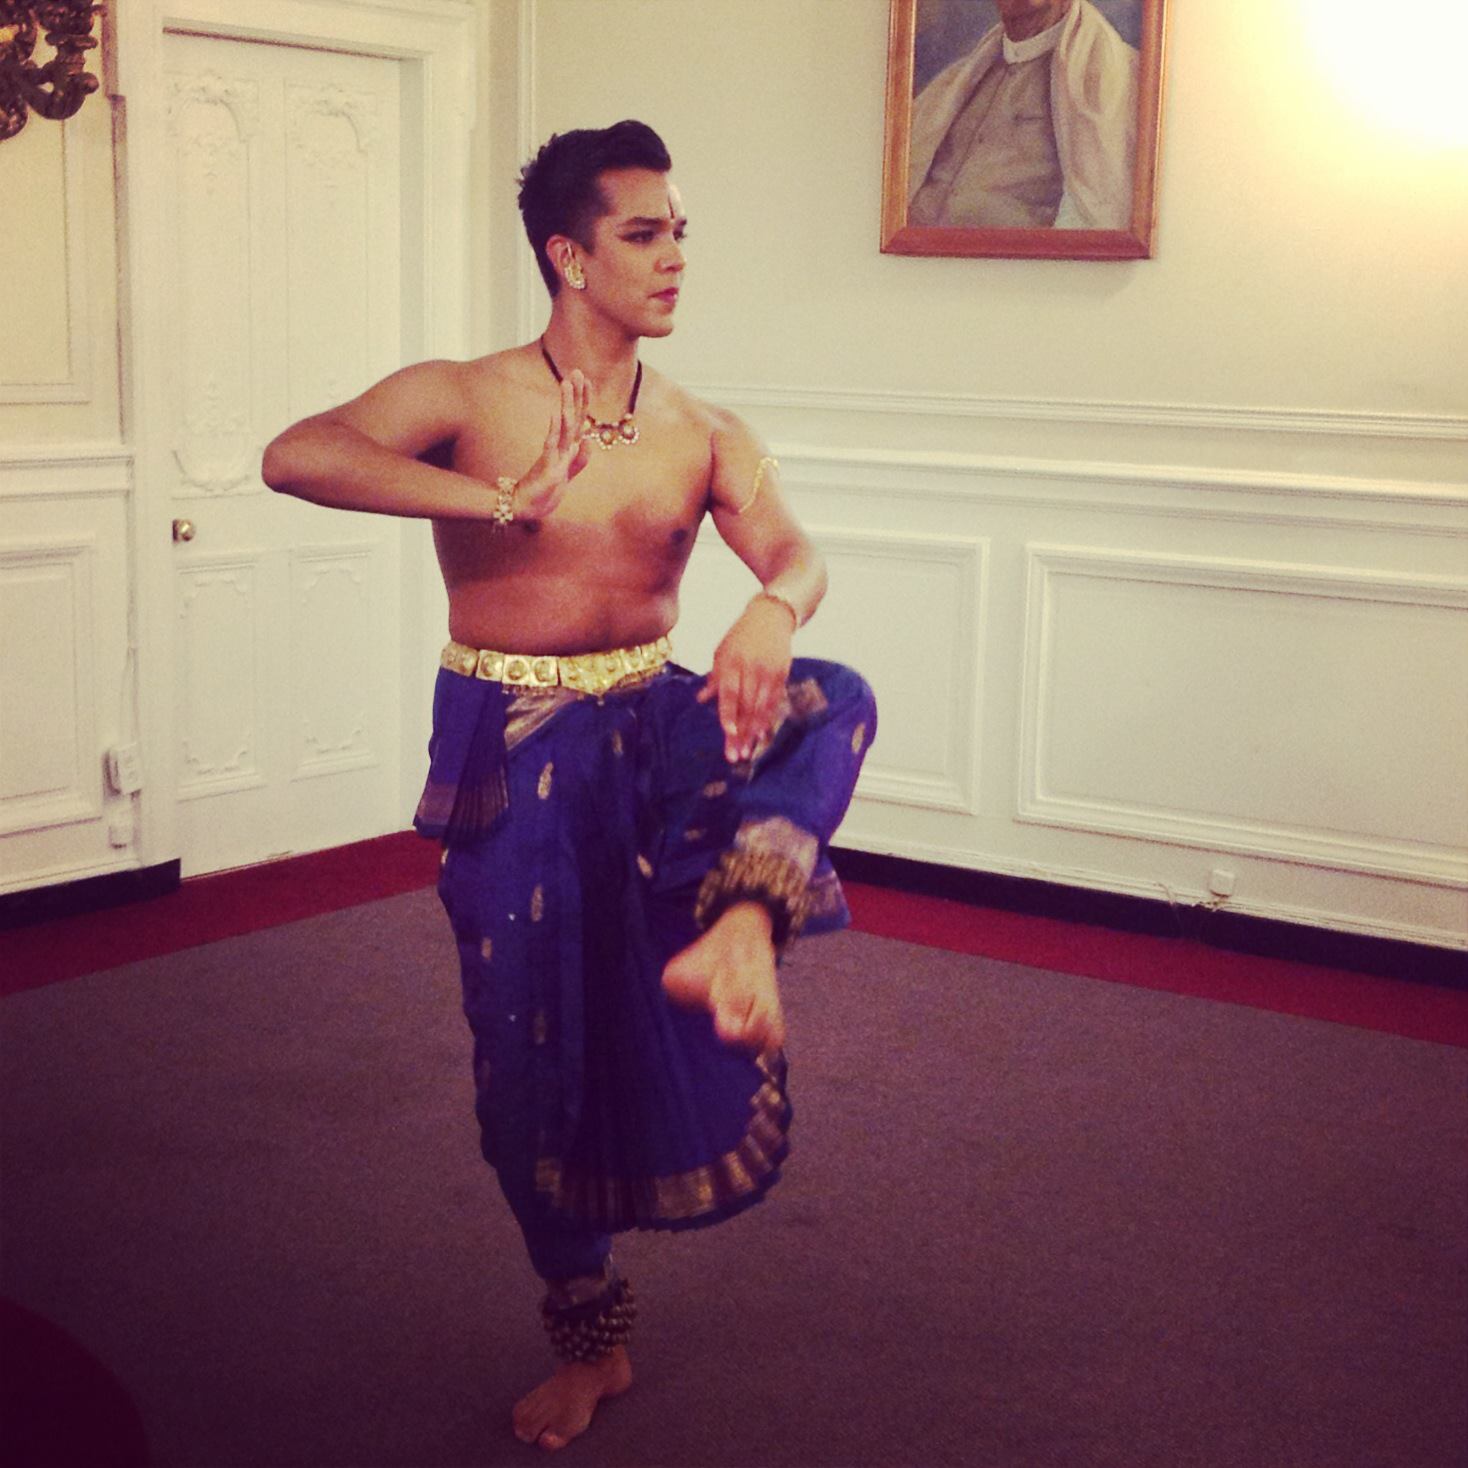 Evening at the Embassy of India